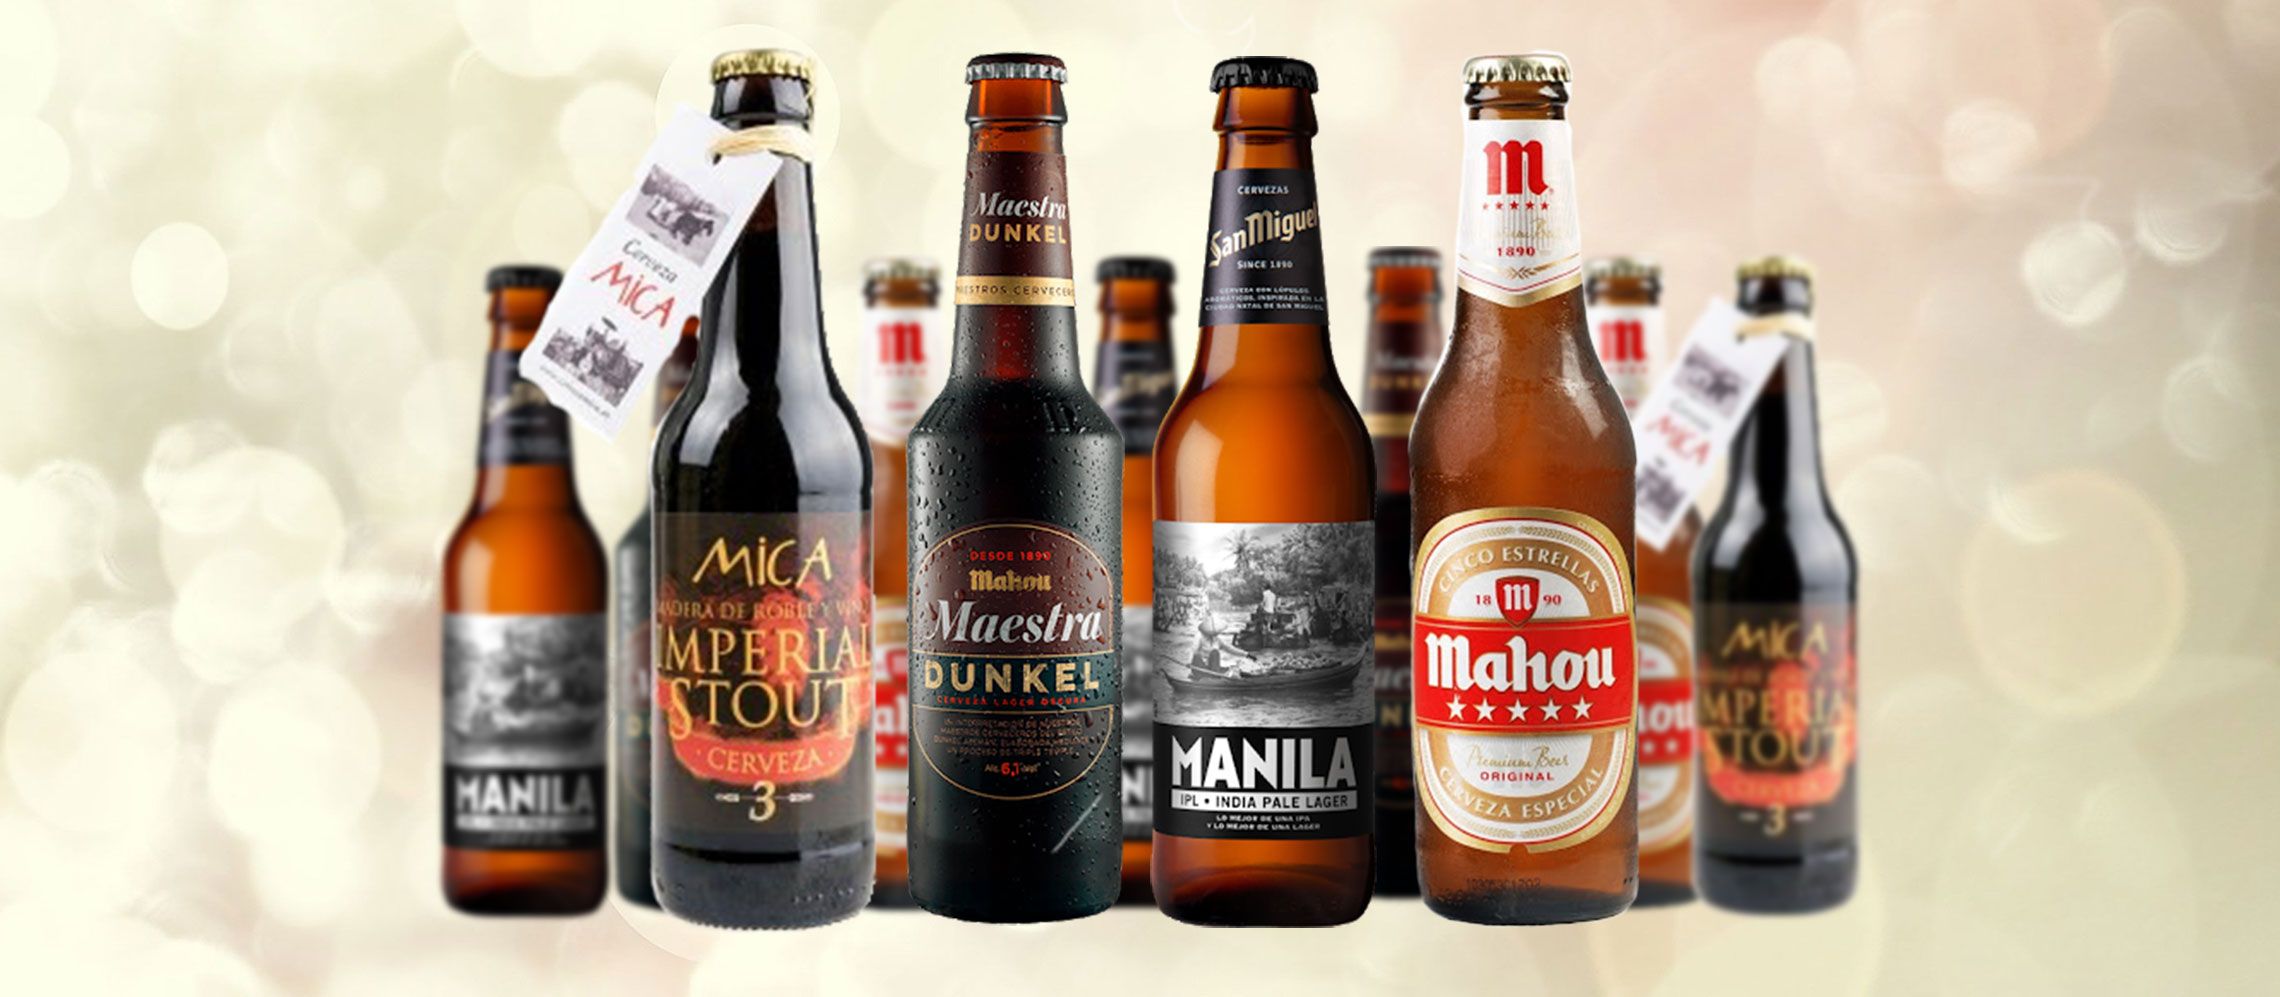 Photo for: Top 7 Beers From Spain To Gulp This Year